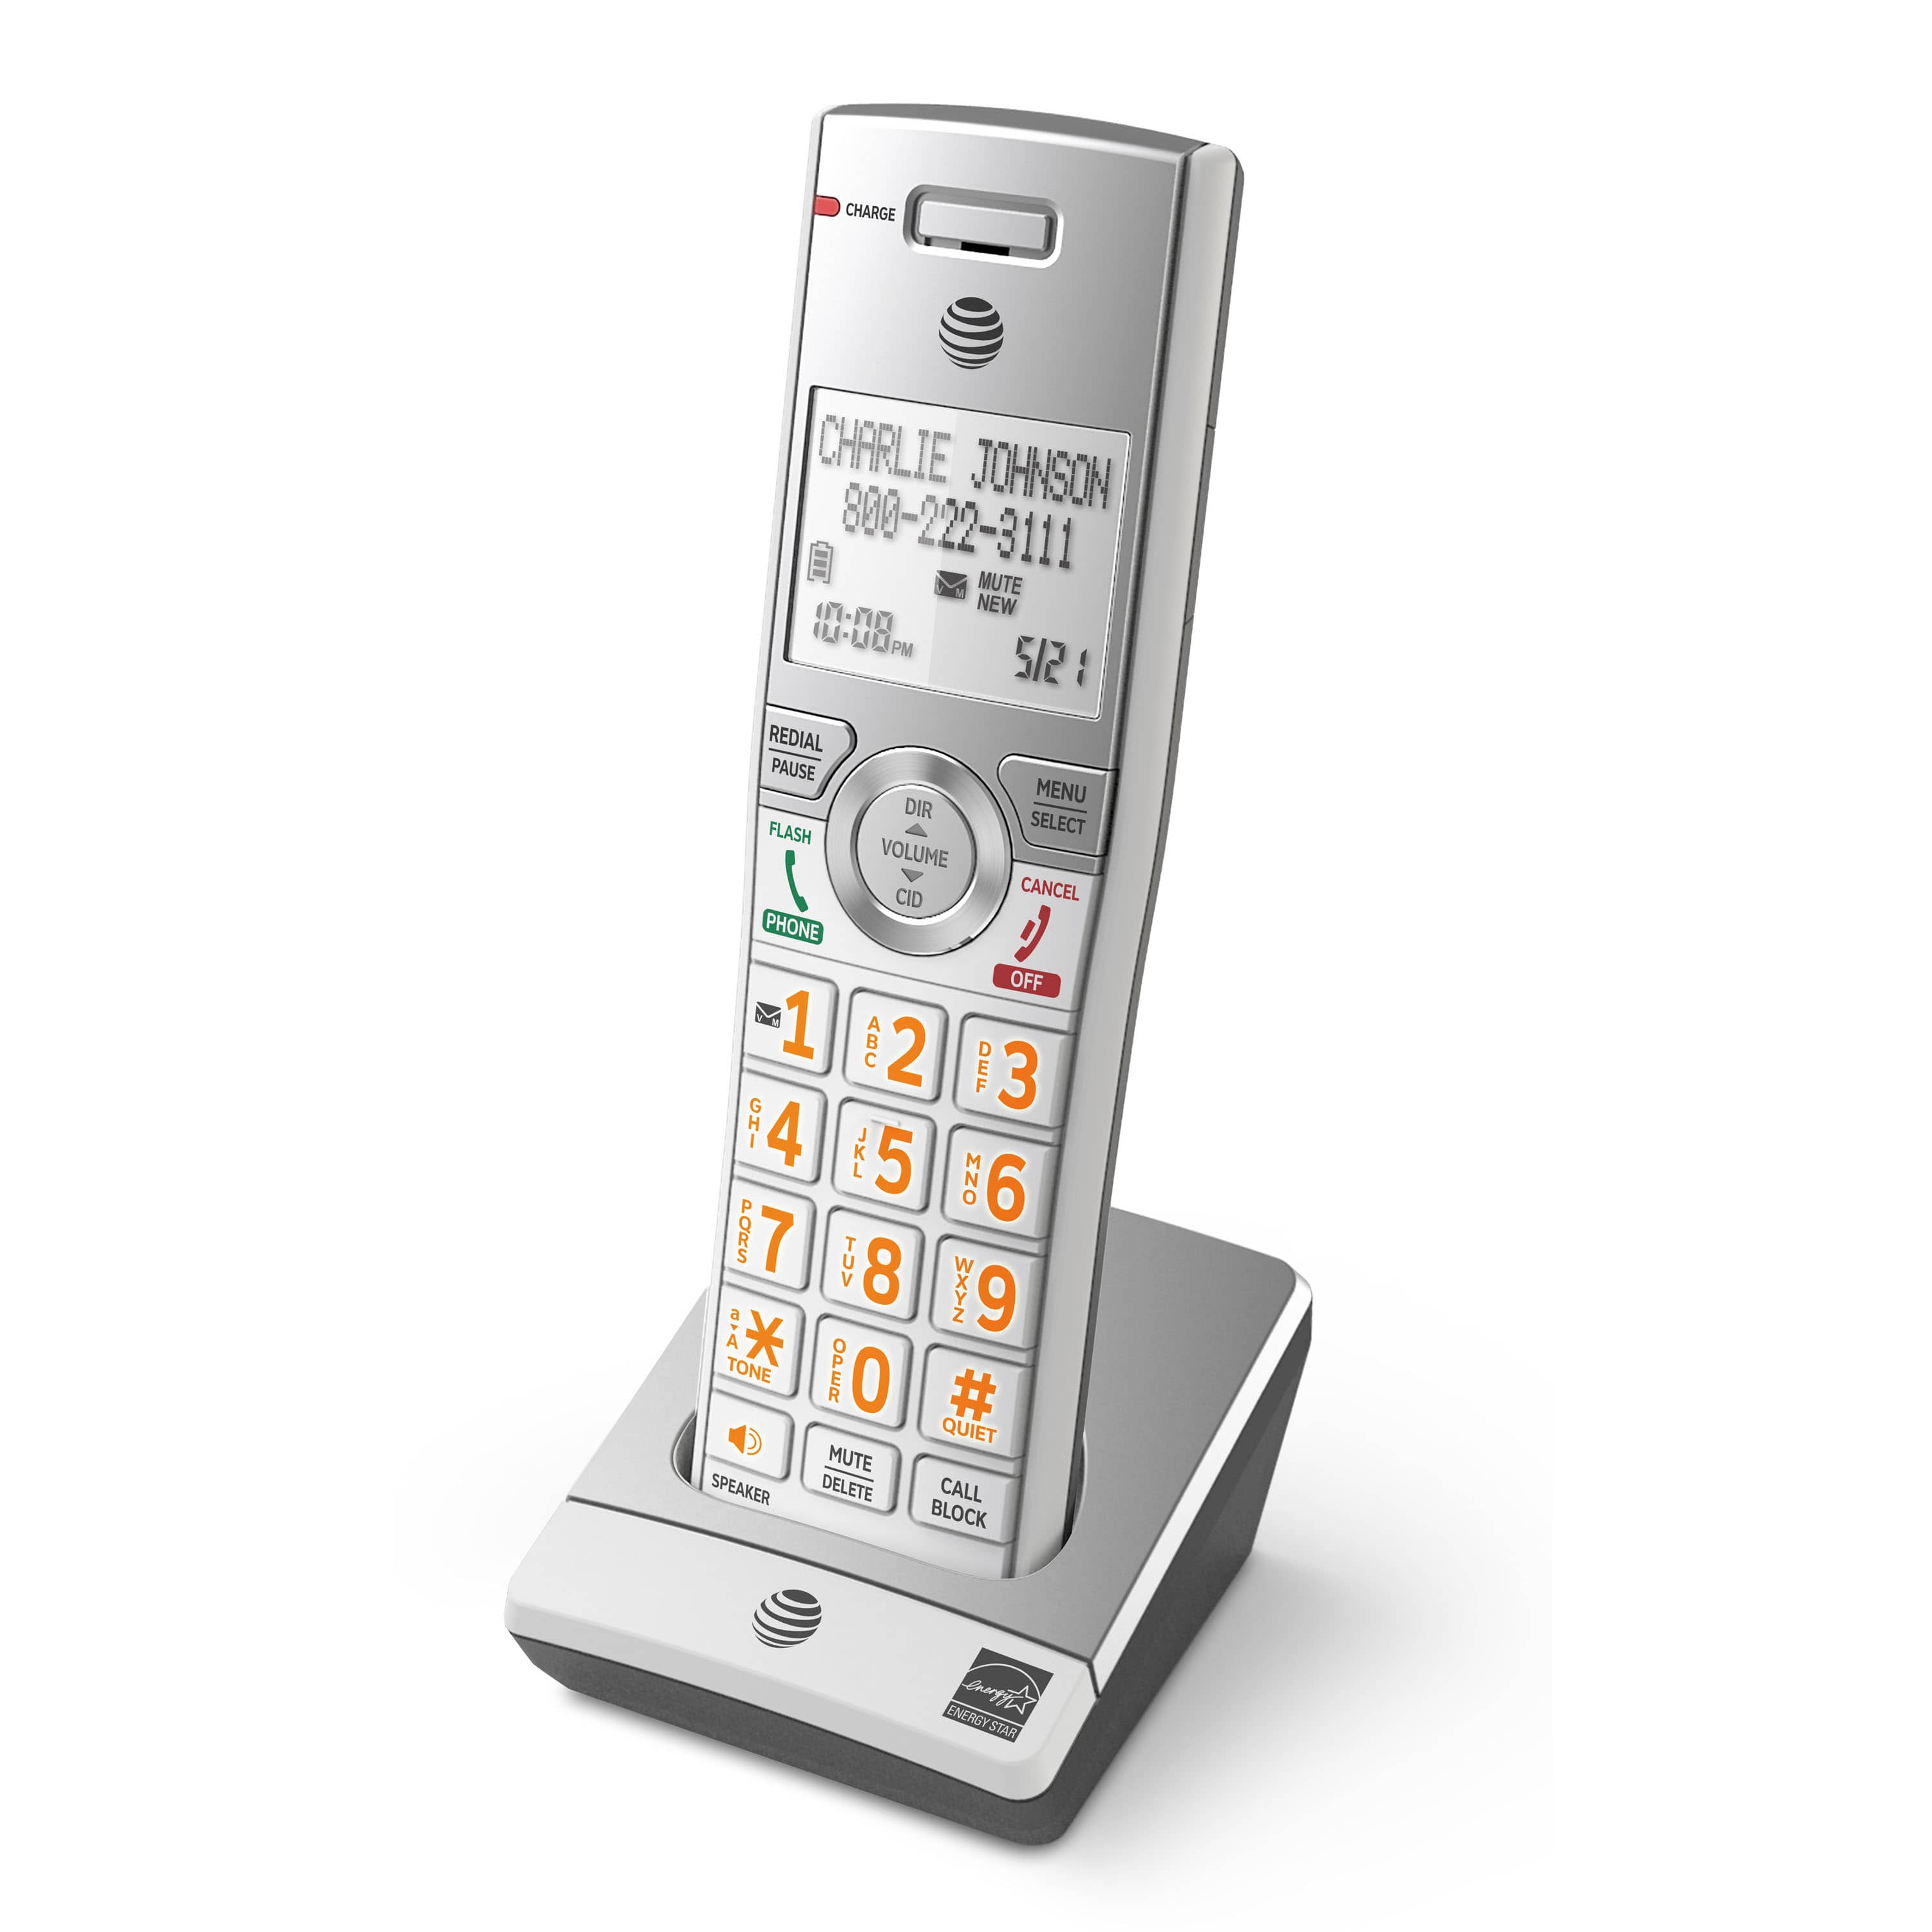 6 handset phone system with smart call blocker - view 18